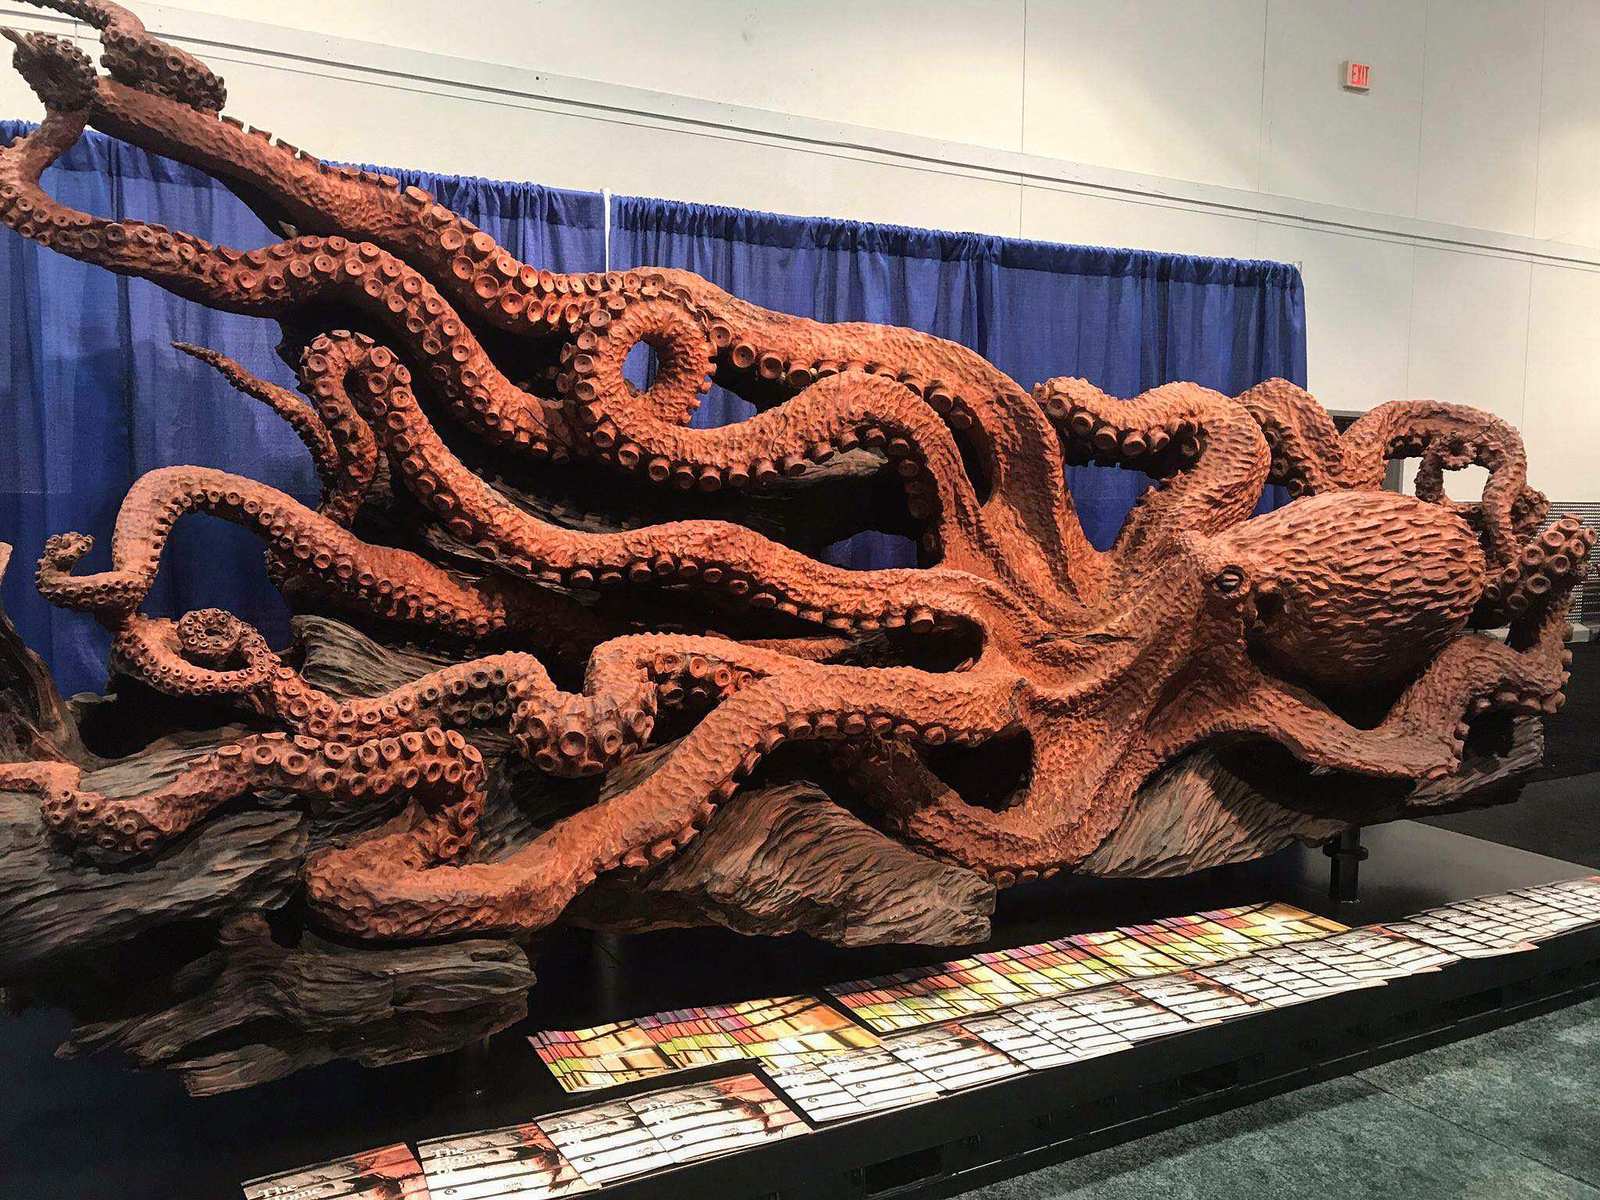 Octopus from a sequoia trunk - Octopus, Tree, Woodworking, Wood carving, Sculpture